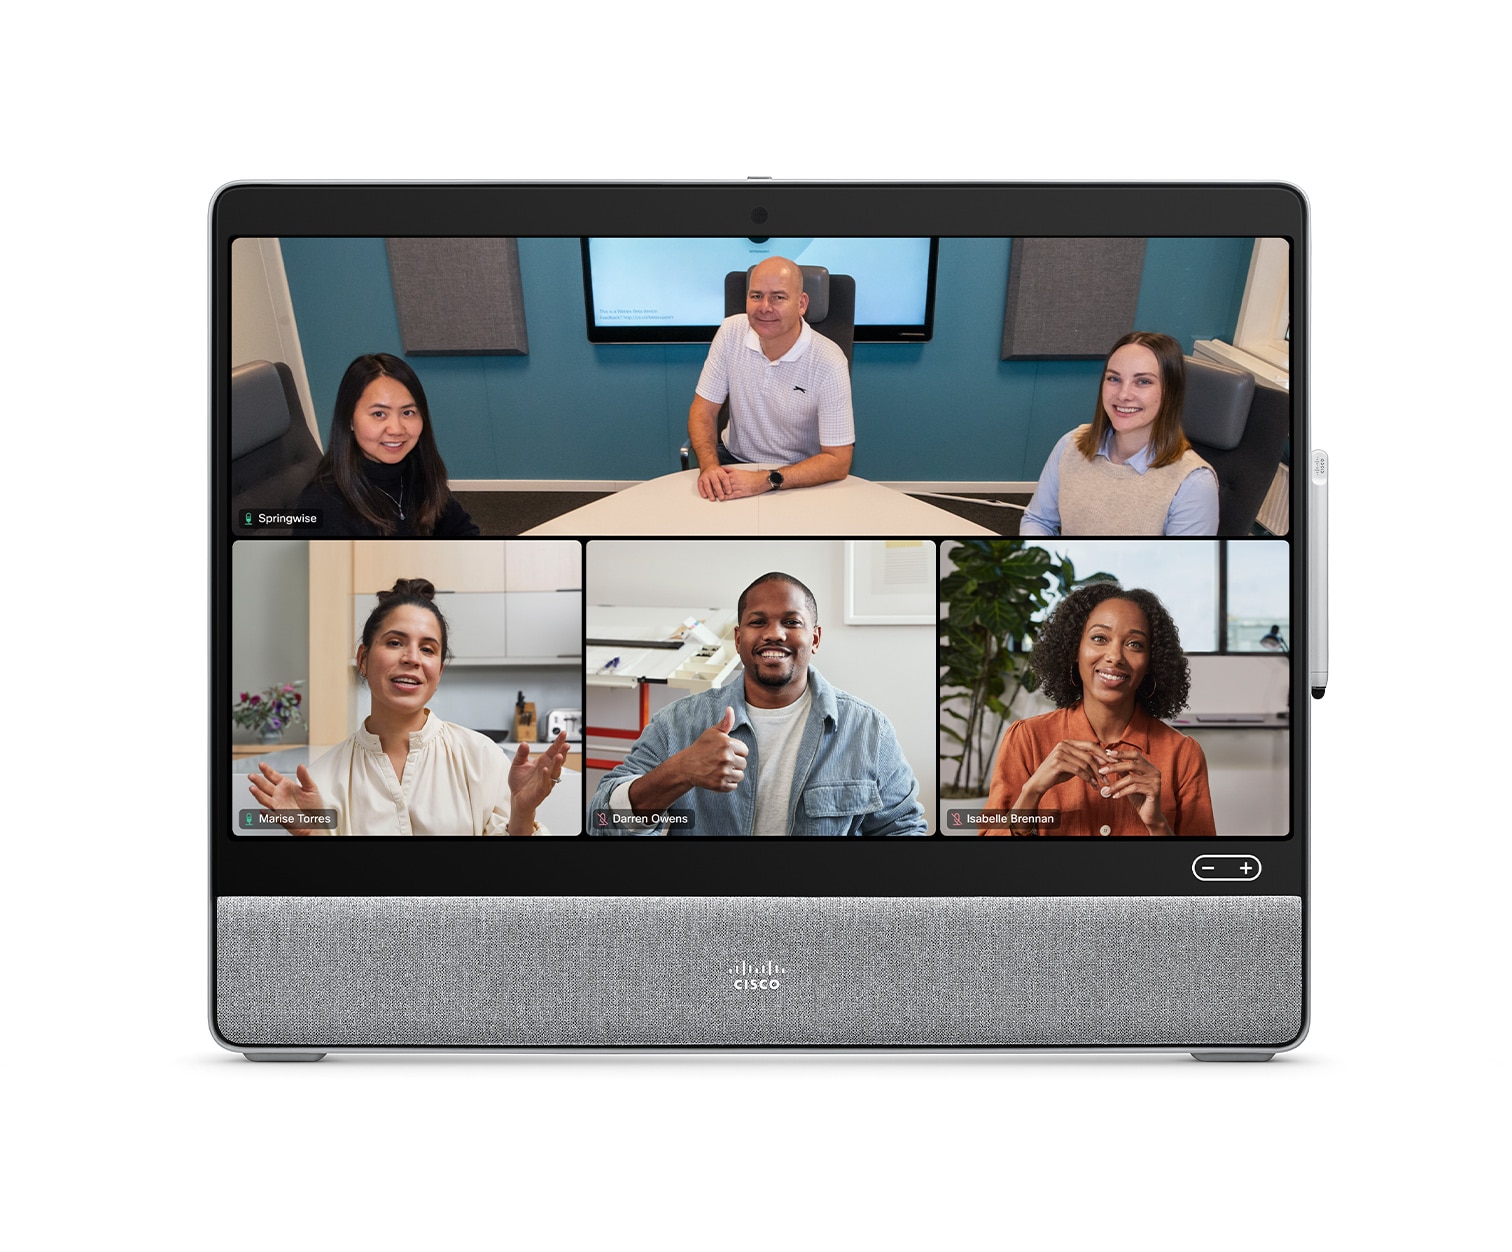 People Focus view on Cisco Desk device with Webex meeting platform selected for video conference.